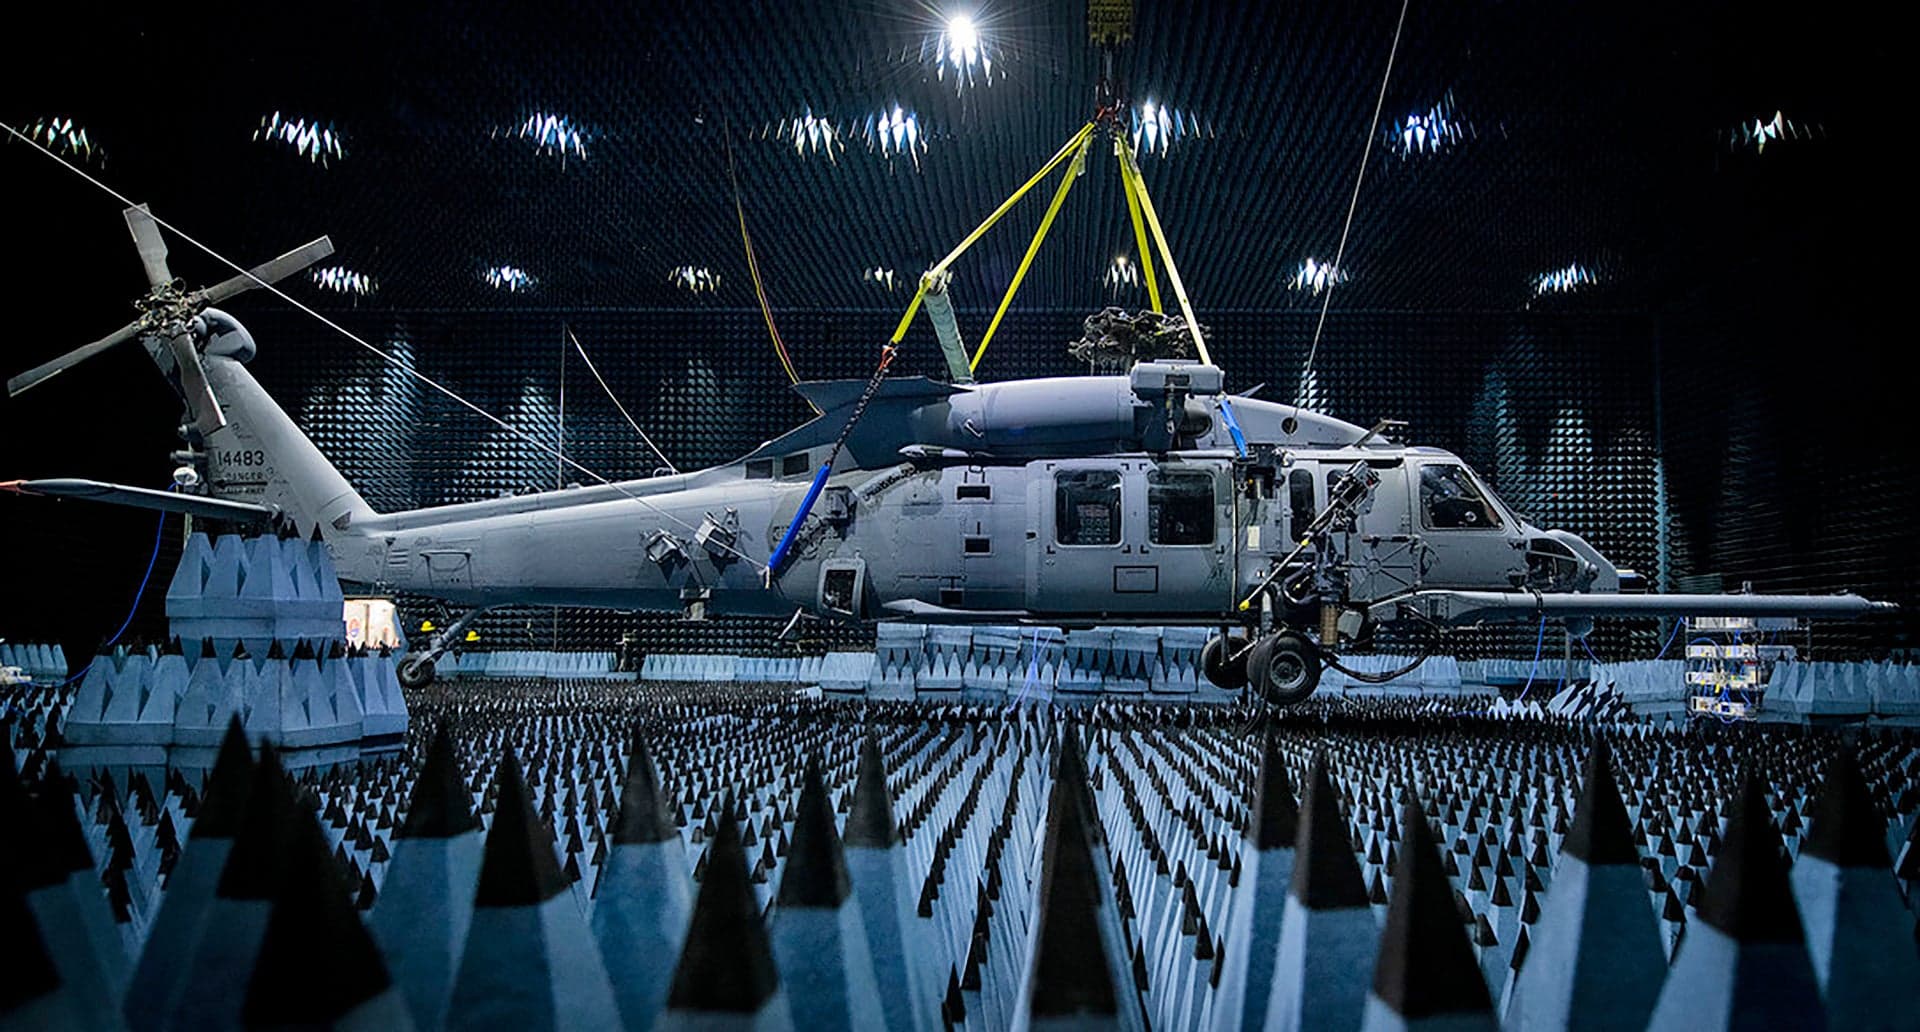 Check Out These Wicked Shots Of The Air Force’s New Rescue Helicopter In An Anechoic Chamber